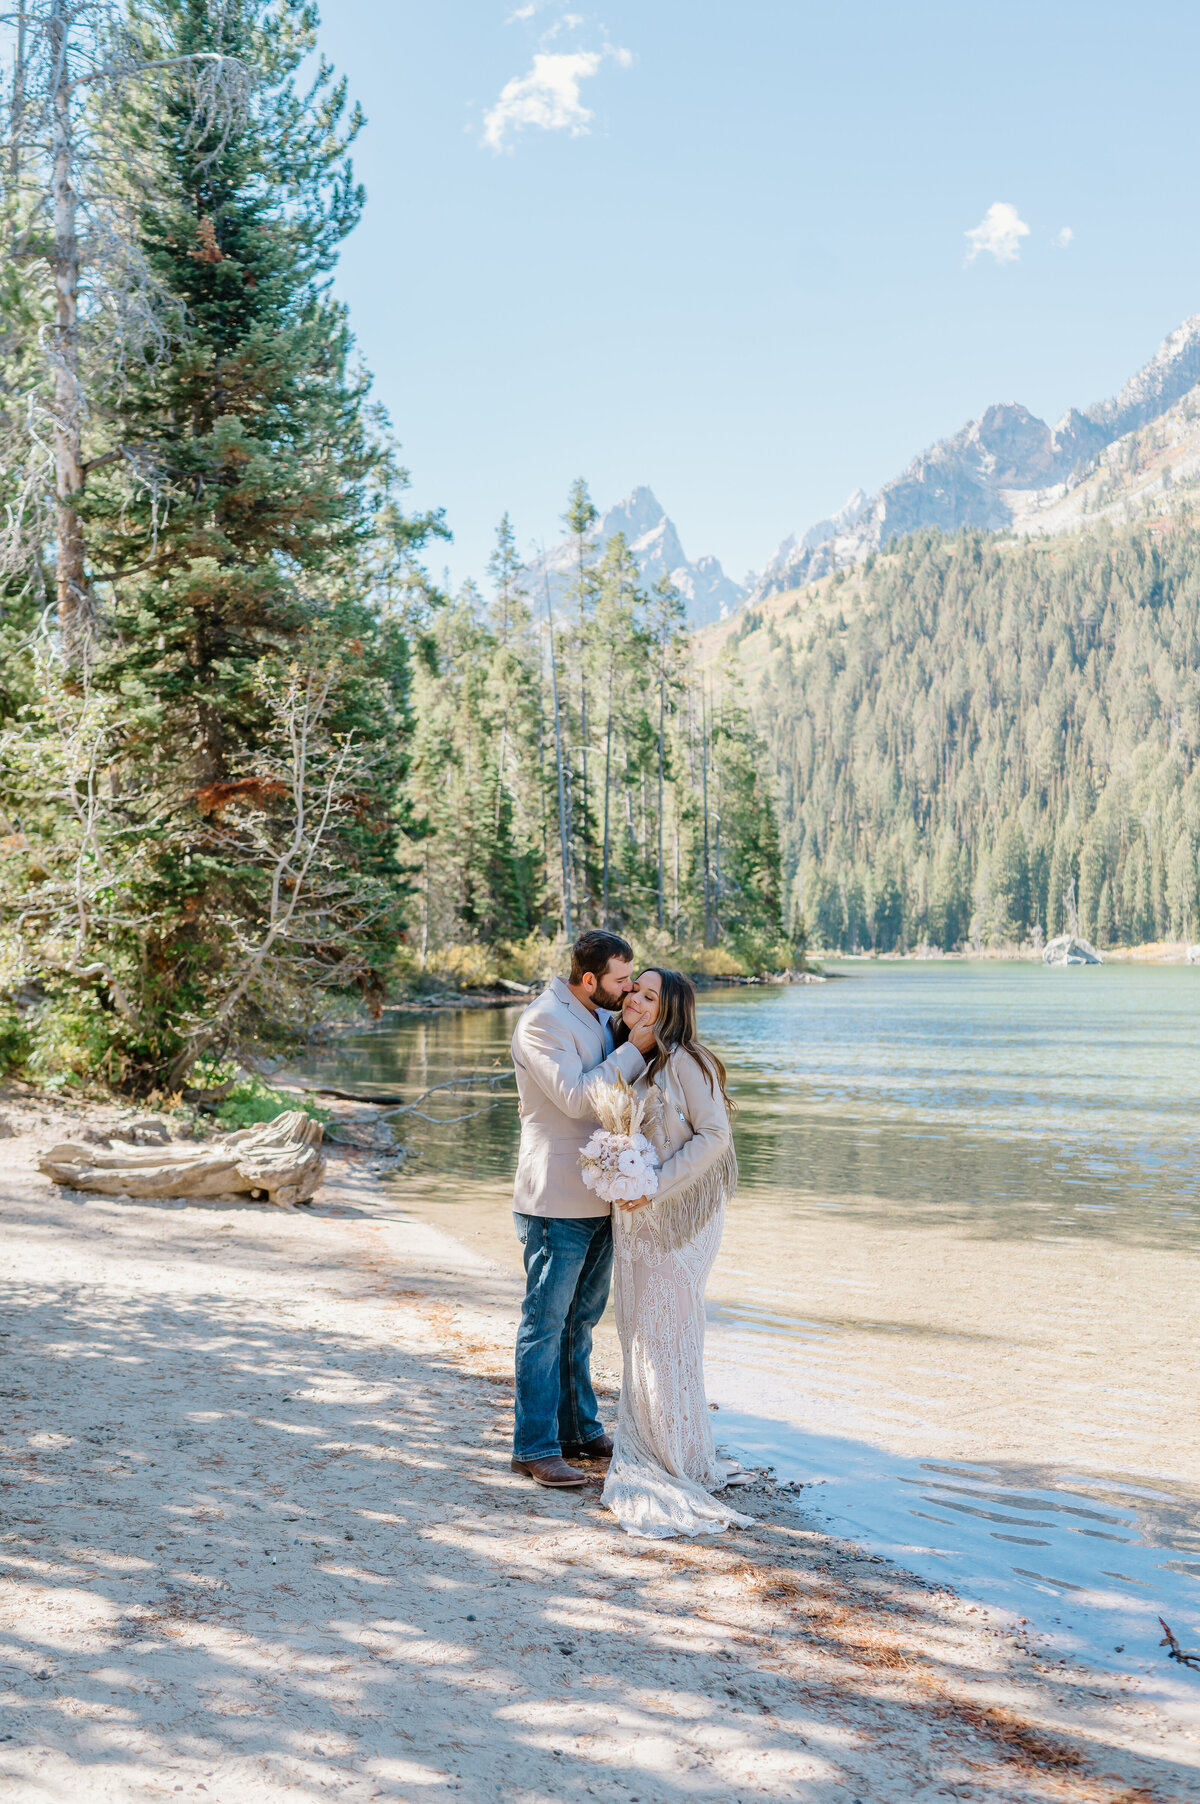 Holland-Elopement-Wyoming-KeelyNicholePhotography-33